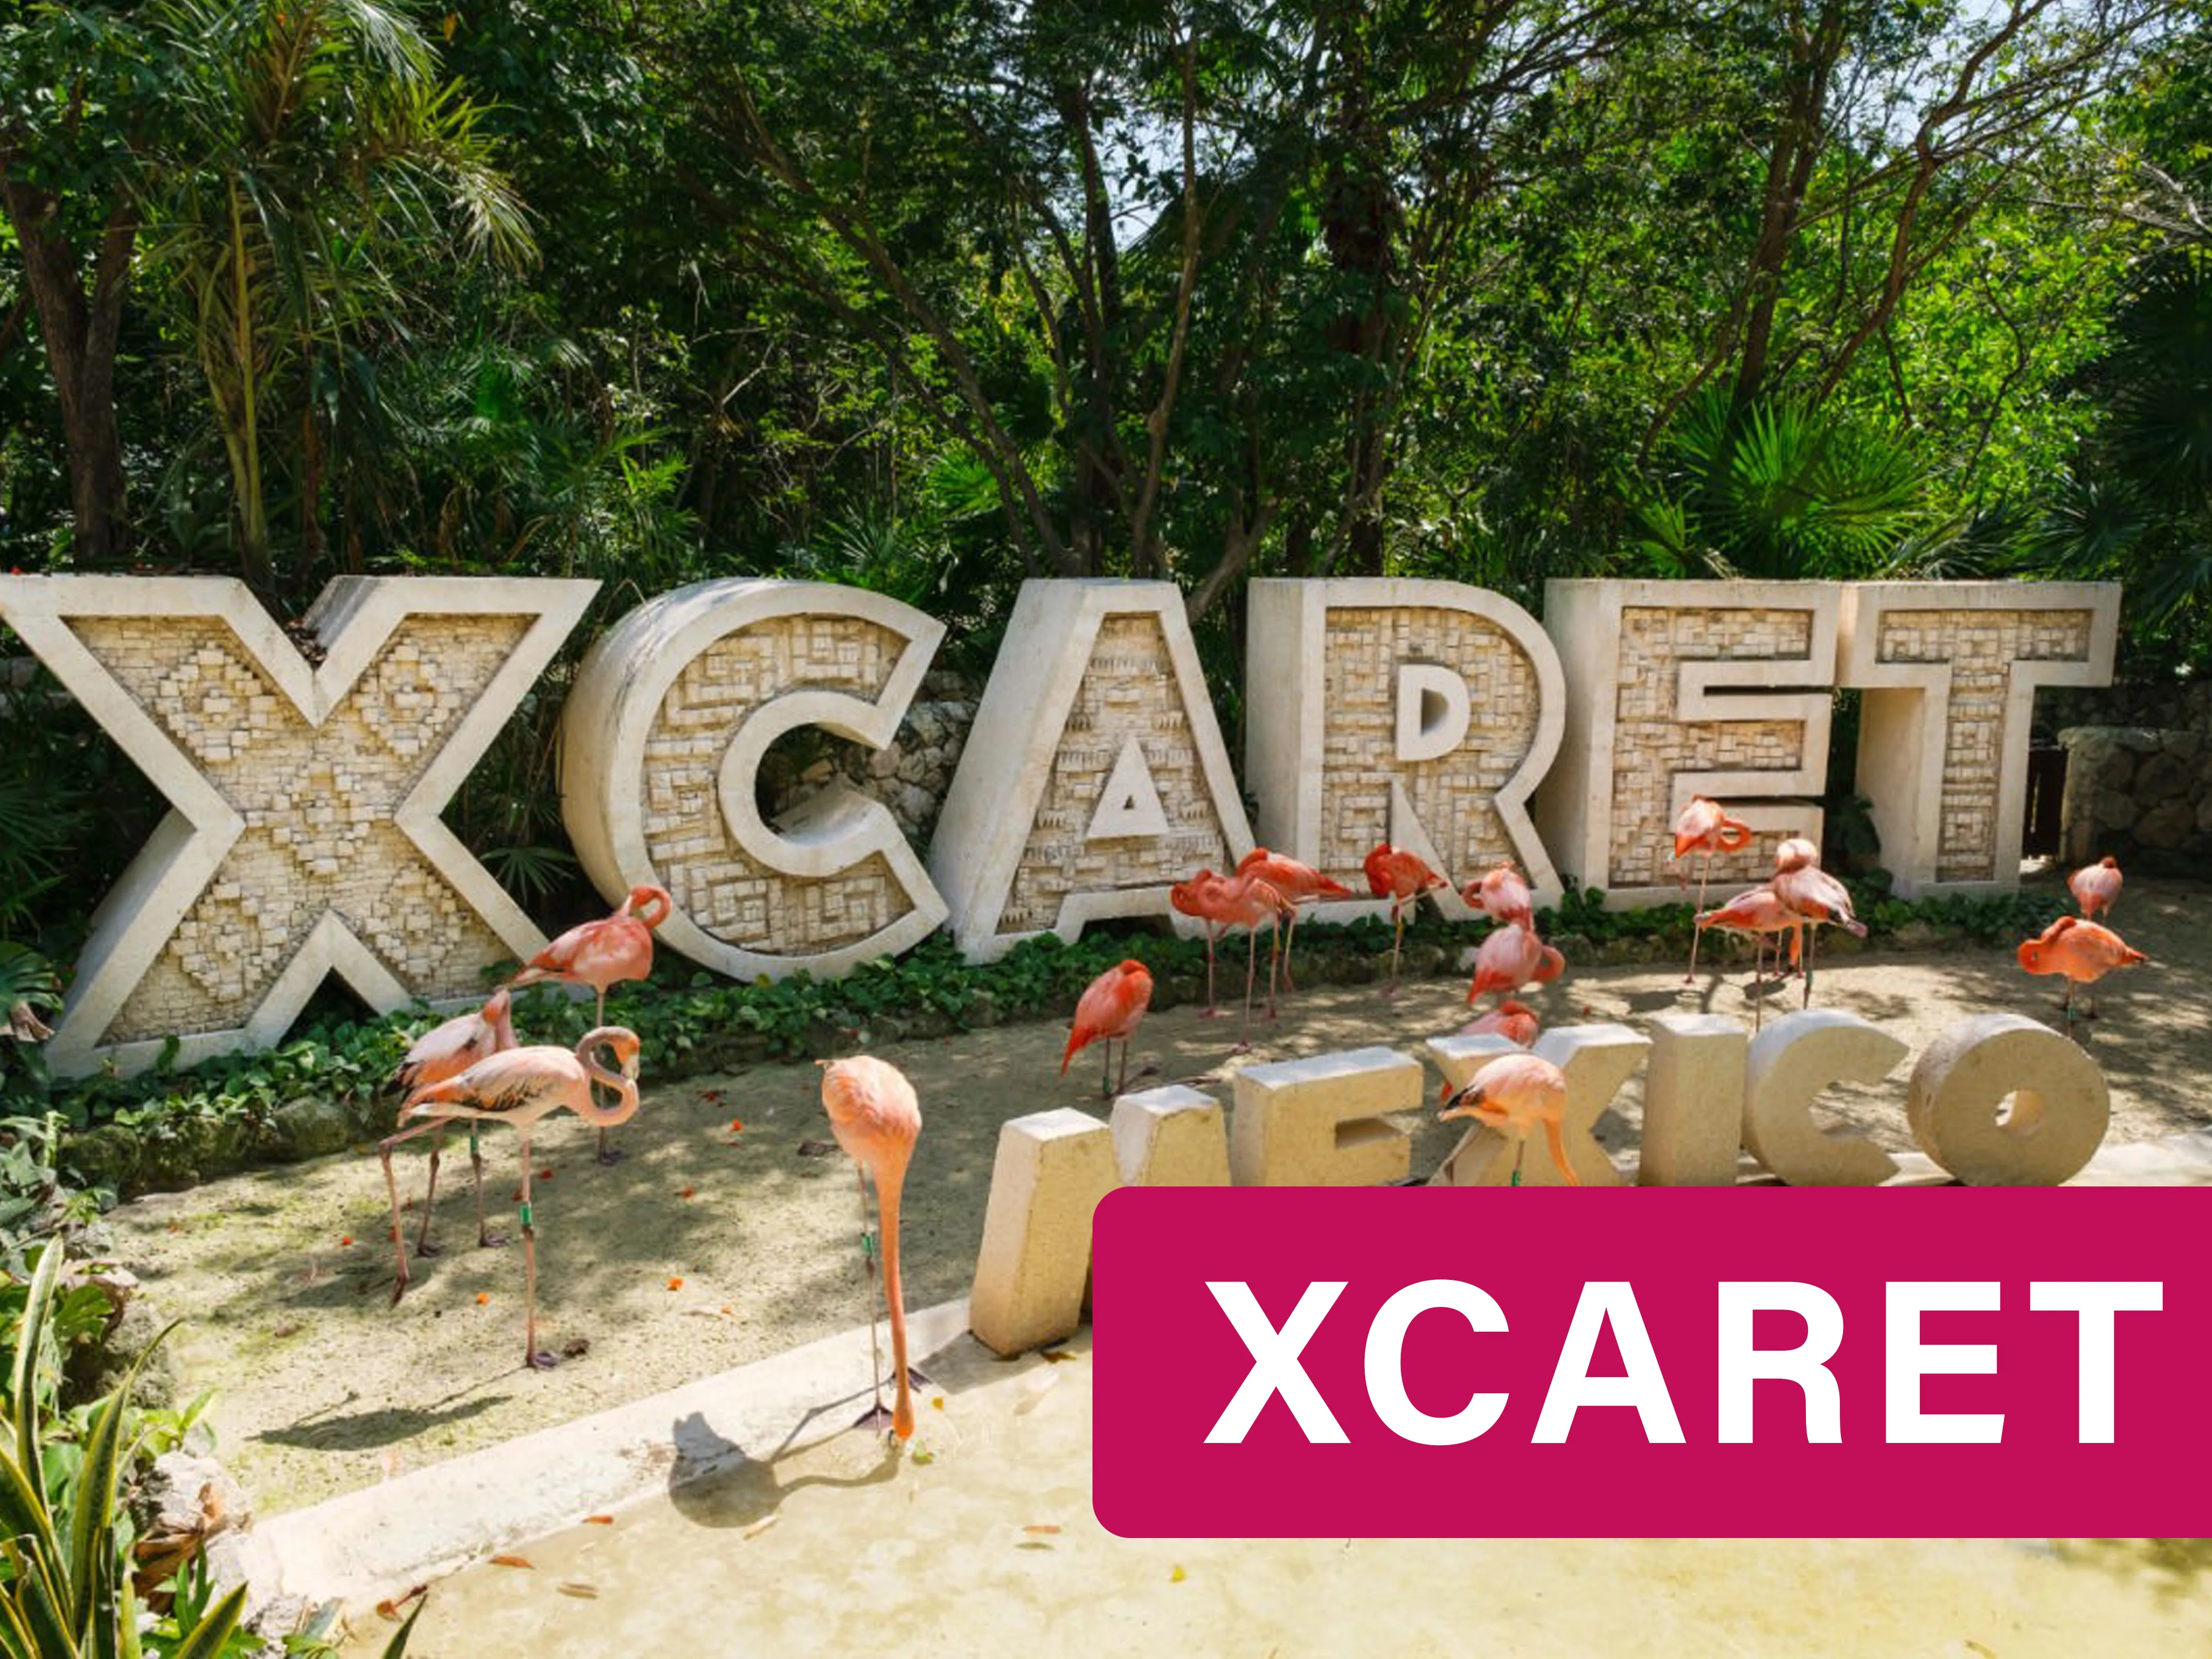 Flamingos walking around stone letters that spell XCARET